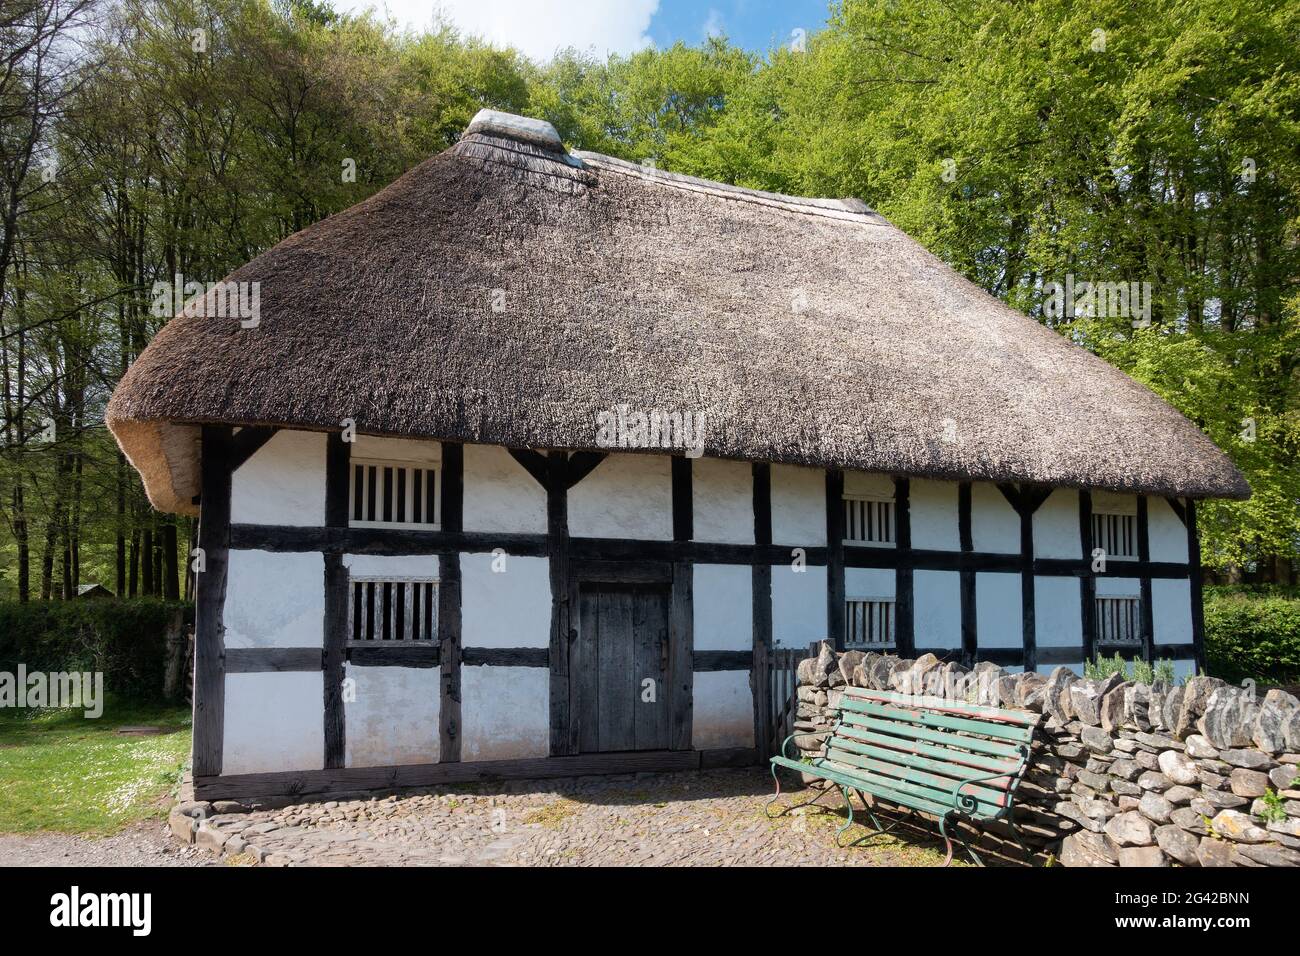 CARDIFF, UK - APRIL 27 : View of Abernodwydd Farmhouse at St Fagans National Museum of History in Cardiff on April 27, 2019 Stock Photo